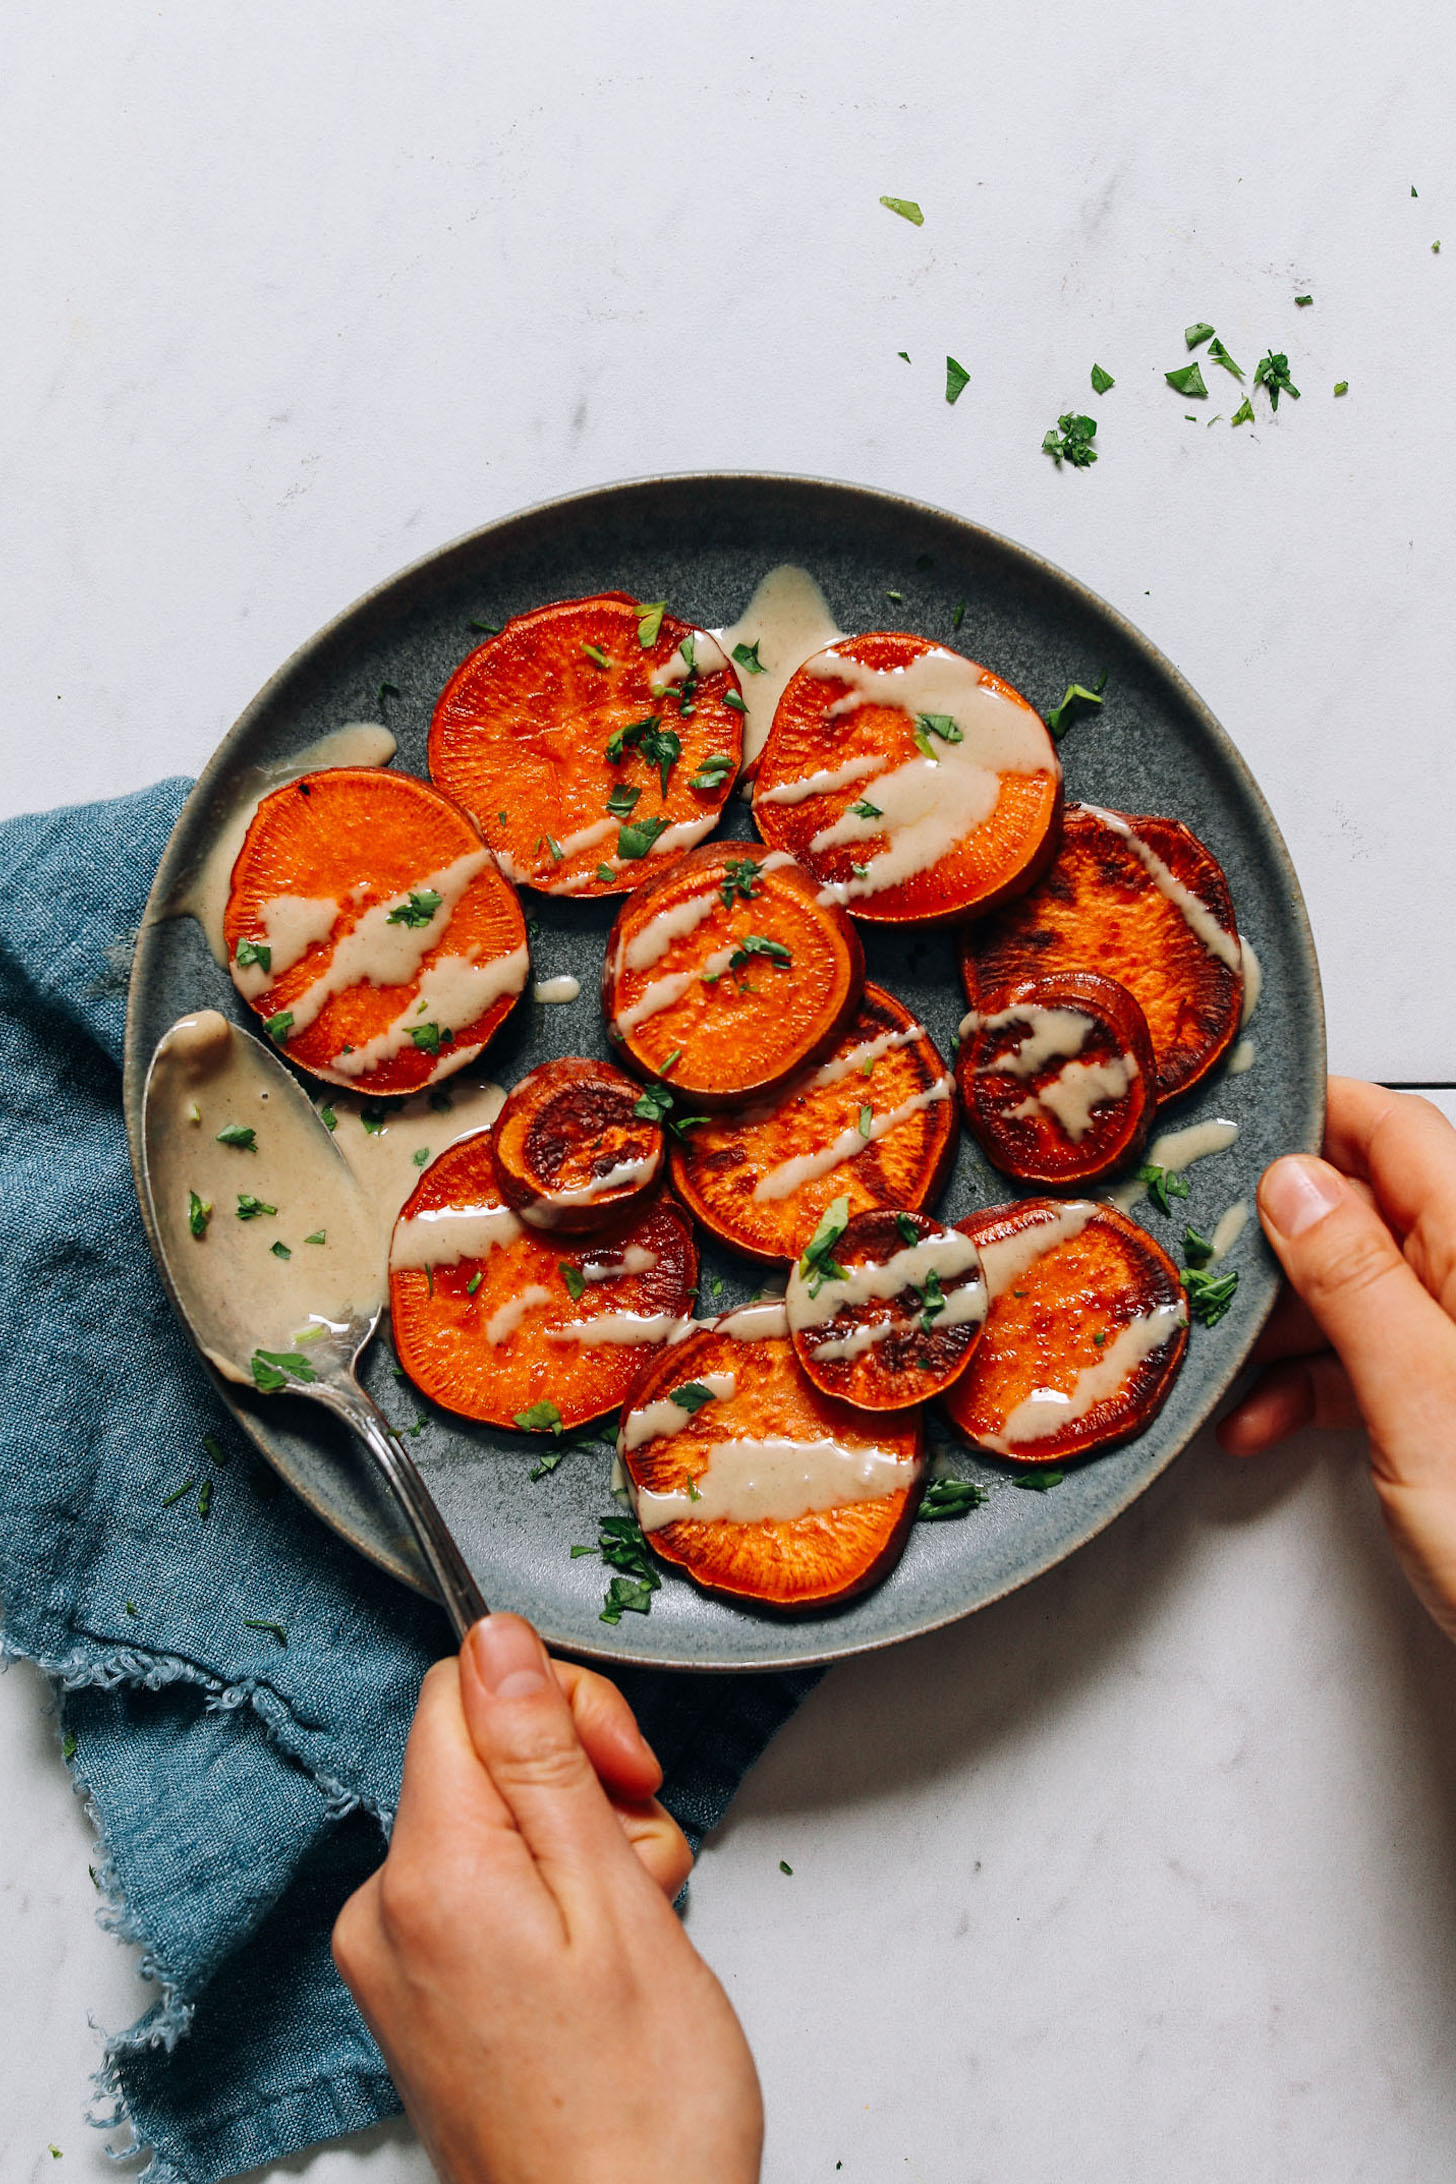 https://minimalistbaker.com/wp-content/uploads/2020/01/DELICIOUS-8-Minute-Sweet-Potatoes-Cooked-on-the-stovetop-with-a-lid-for-SUPER-quick-tender-potatoes-plantbased-glutenfree-minimalistbaker-sweetpotato-recipe-9.jpg